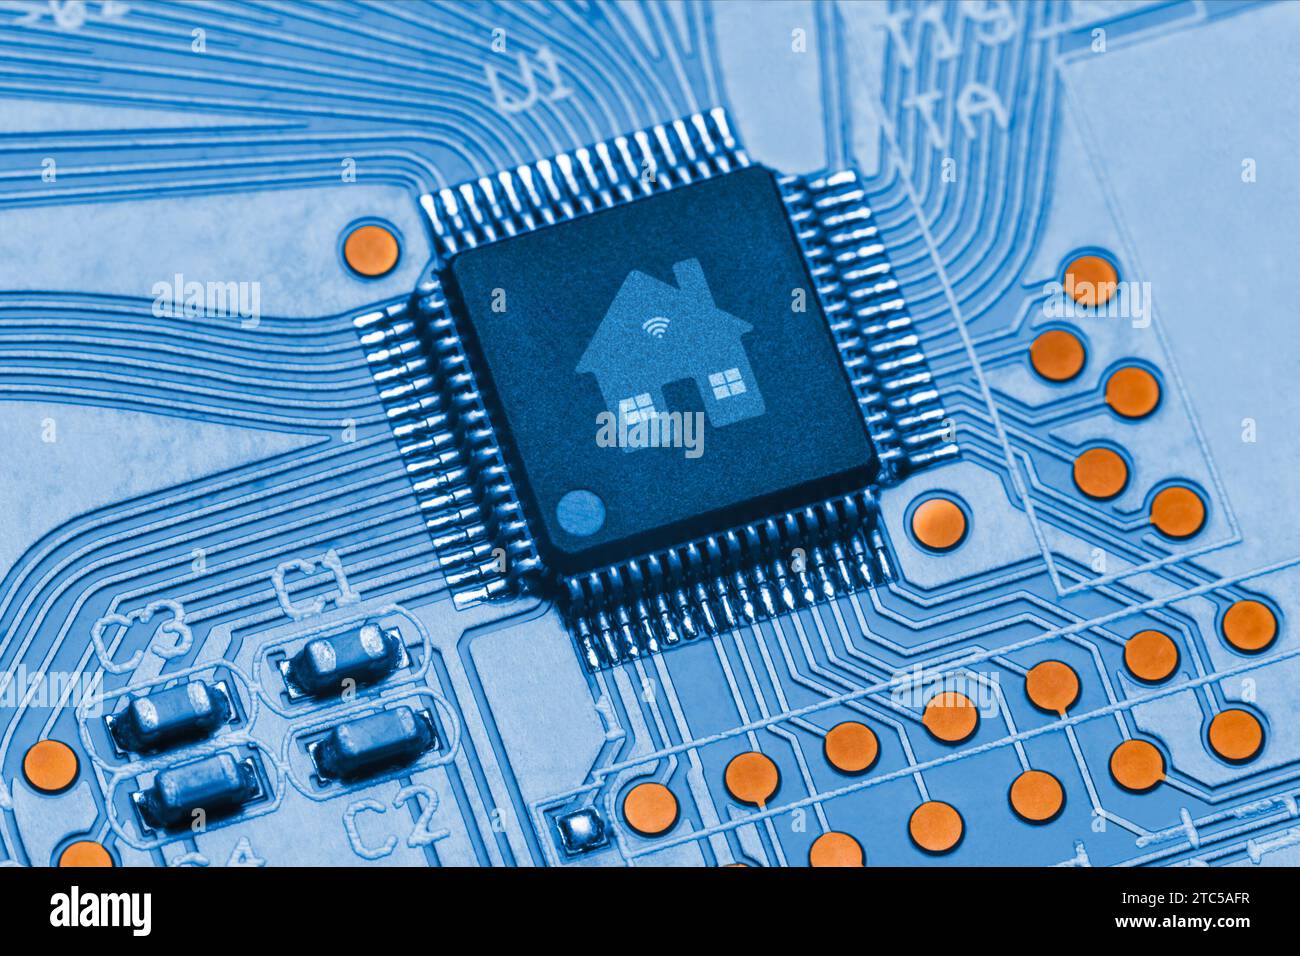 Microchip with a smart home logo on a blue circuit board. Concept of a computerized smart home with Wi-Fi connection Stock Photo